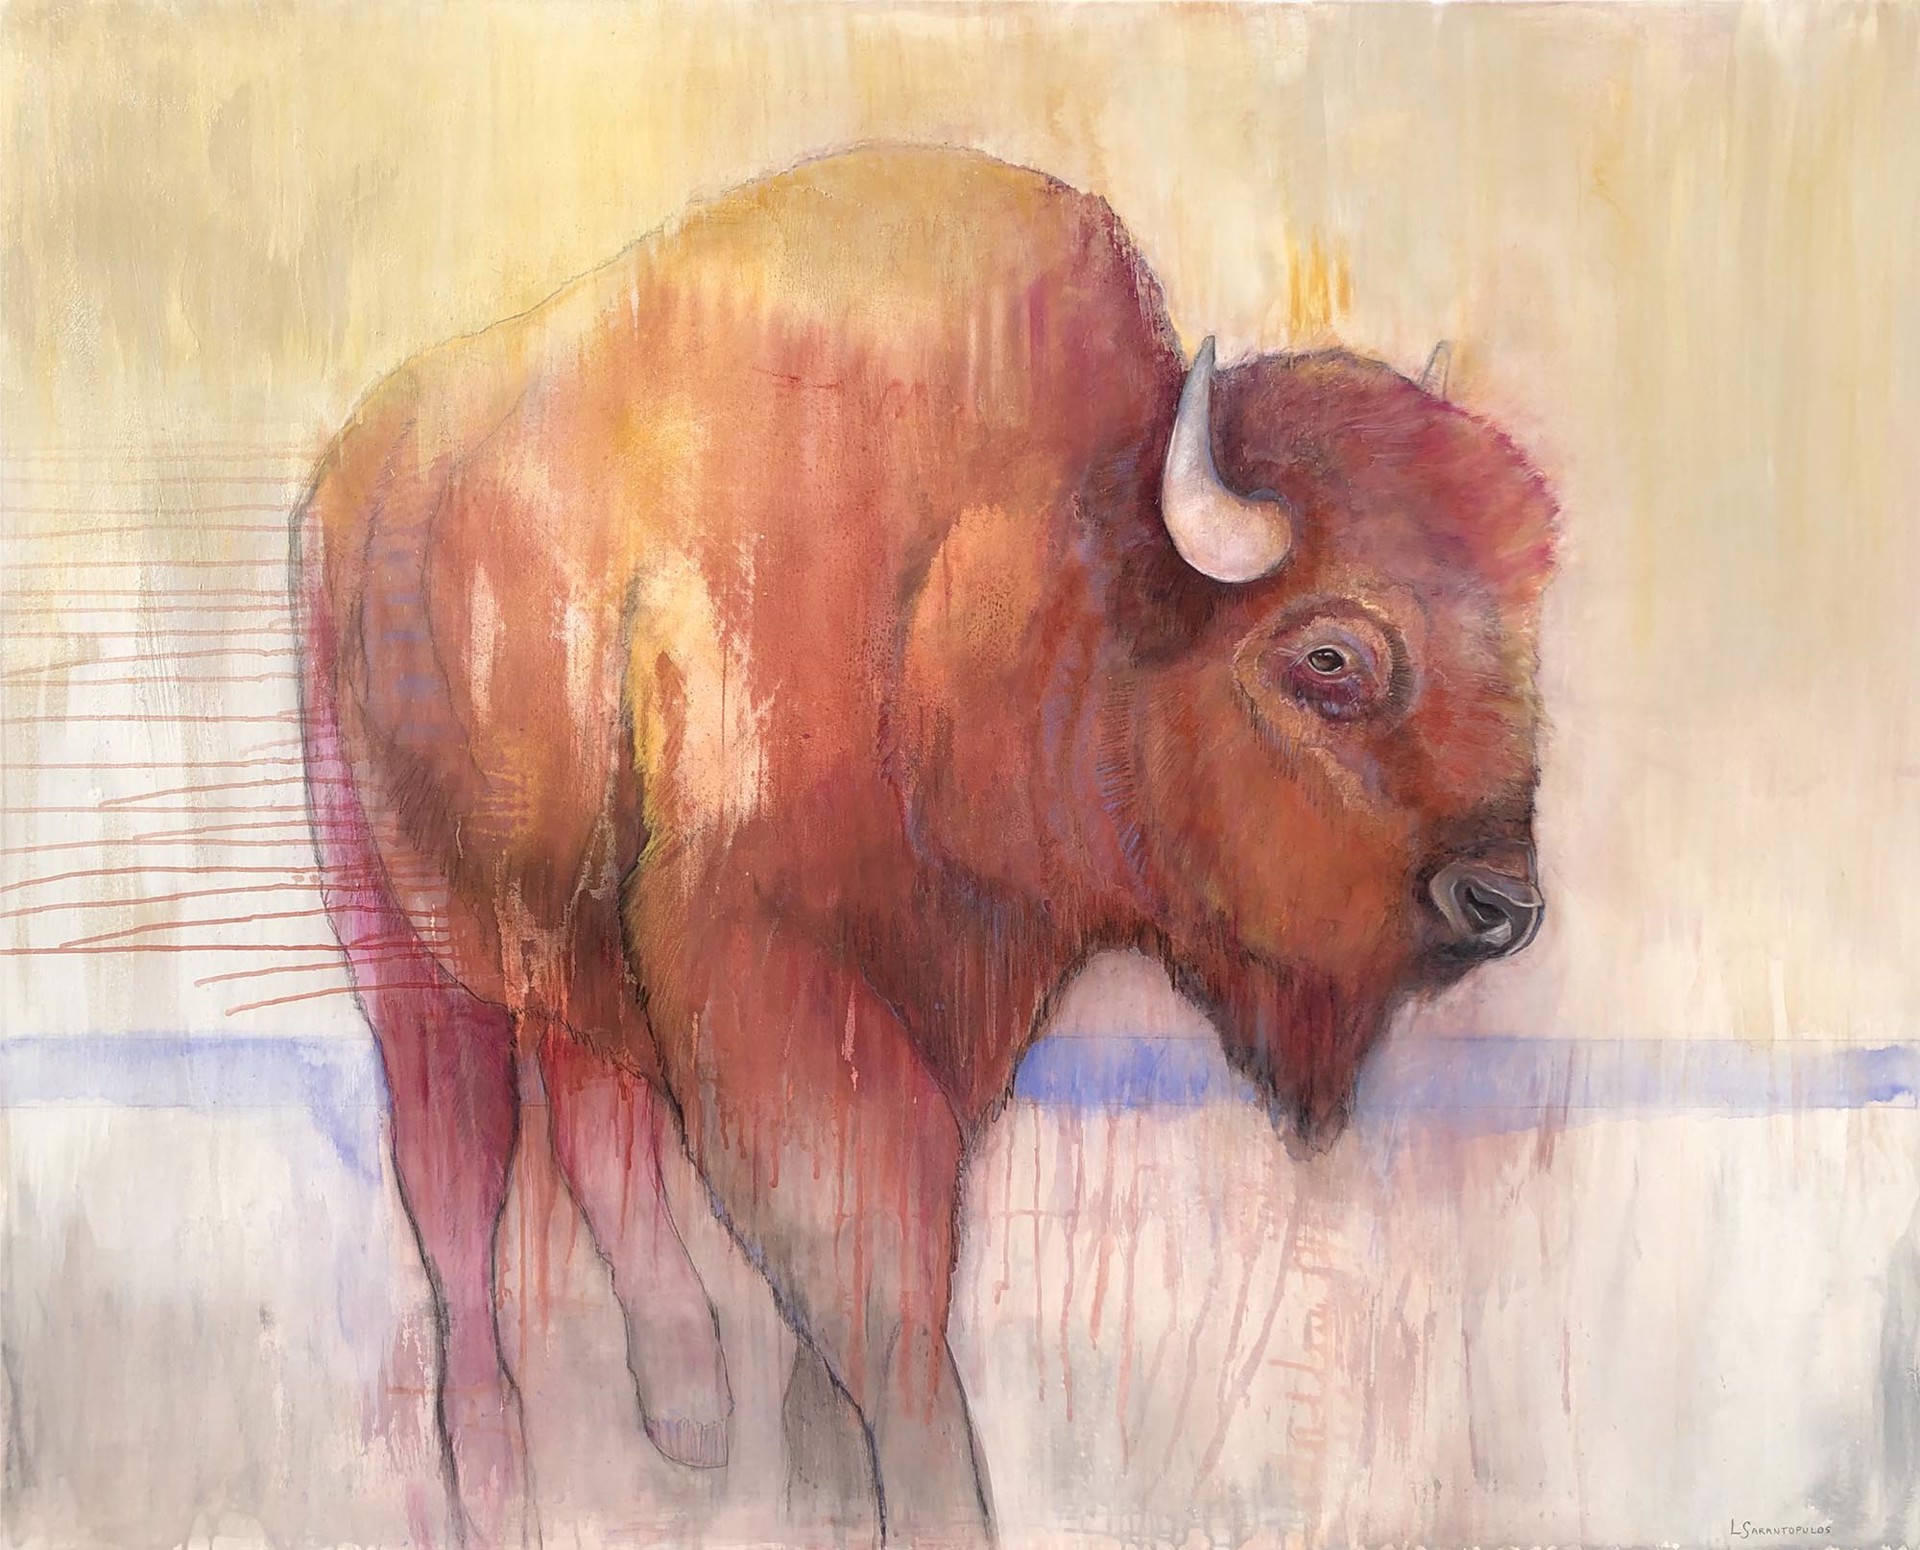 Original Mixed Media Painting Featuring A Walking Bison In Sunset Tones Over Abstract Background With Purple Horizon Line